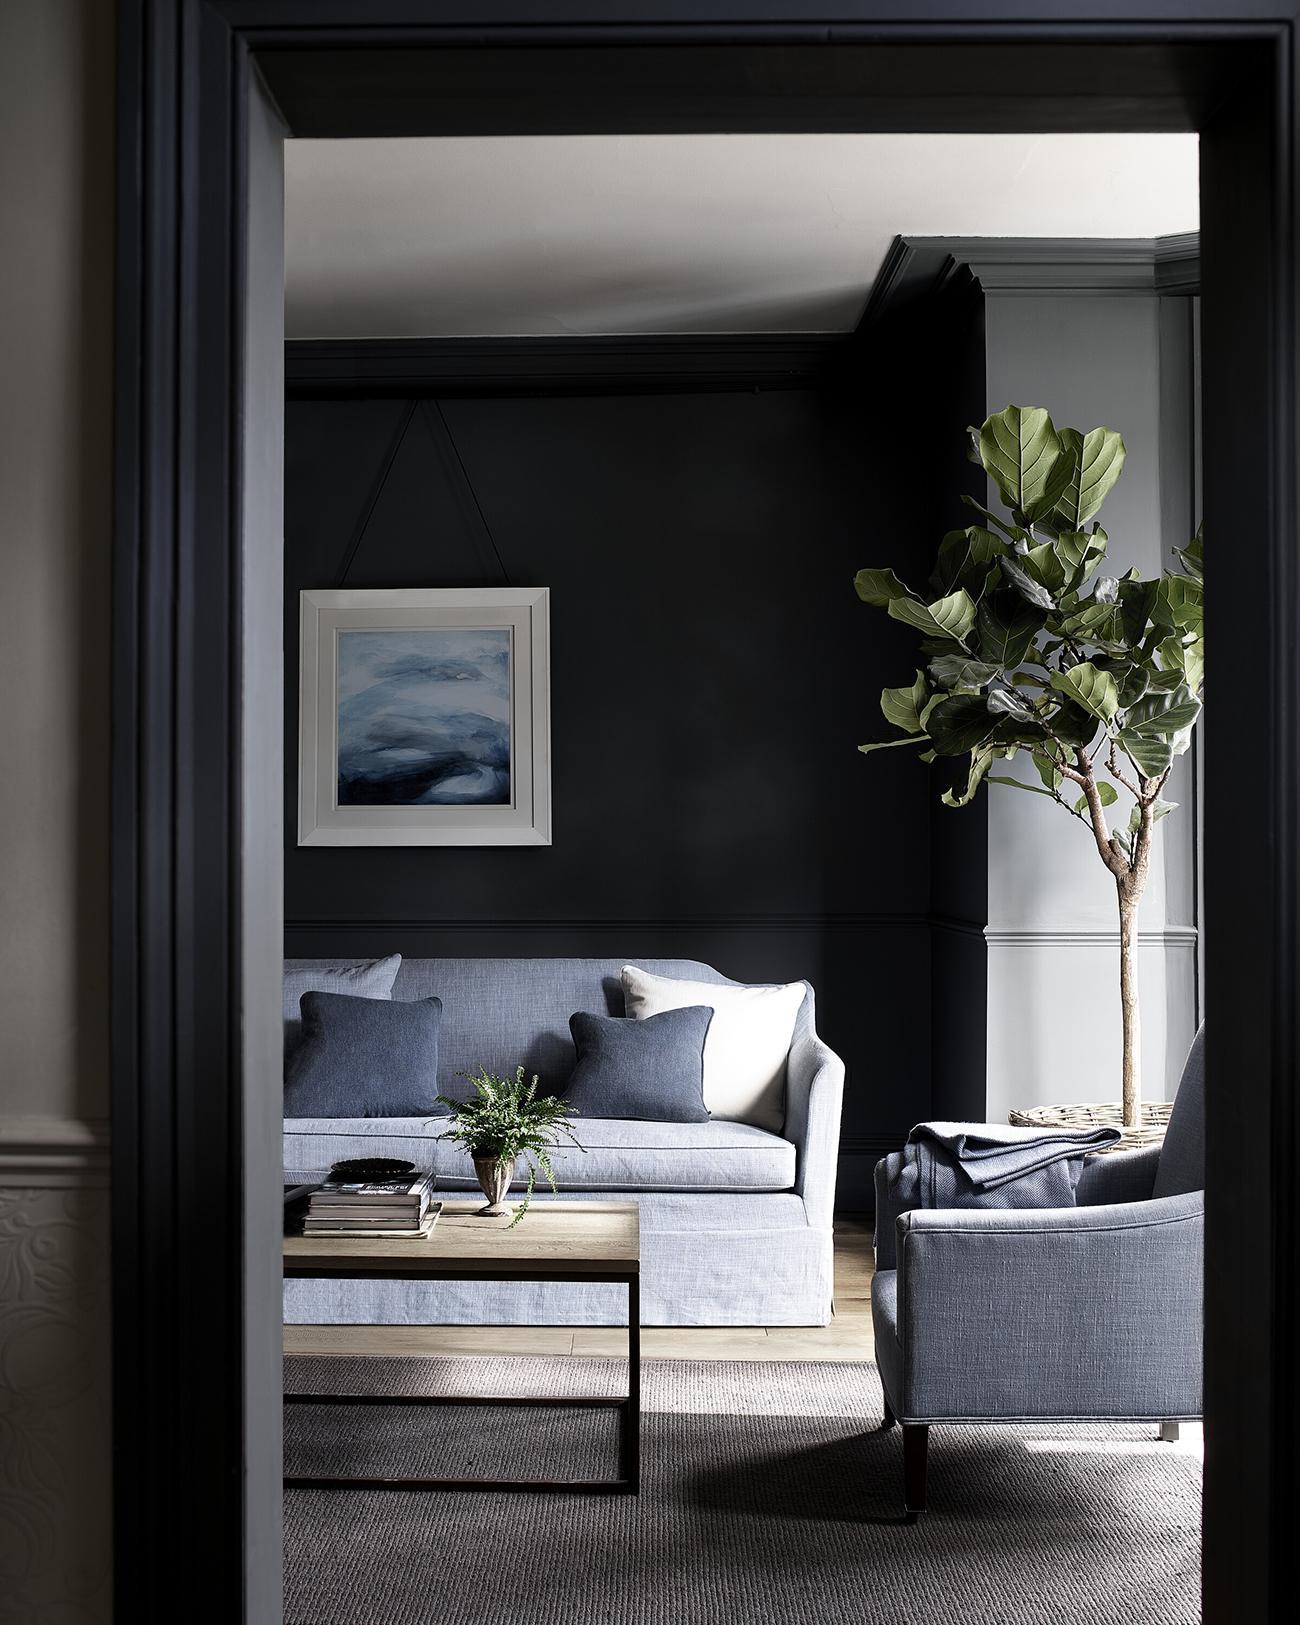 A grey living room idea by Neptune with grey-blue upholstered sofas, framed wall art and houseplant